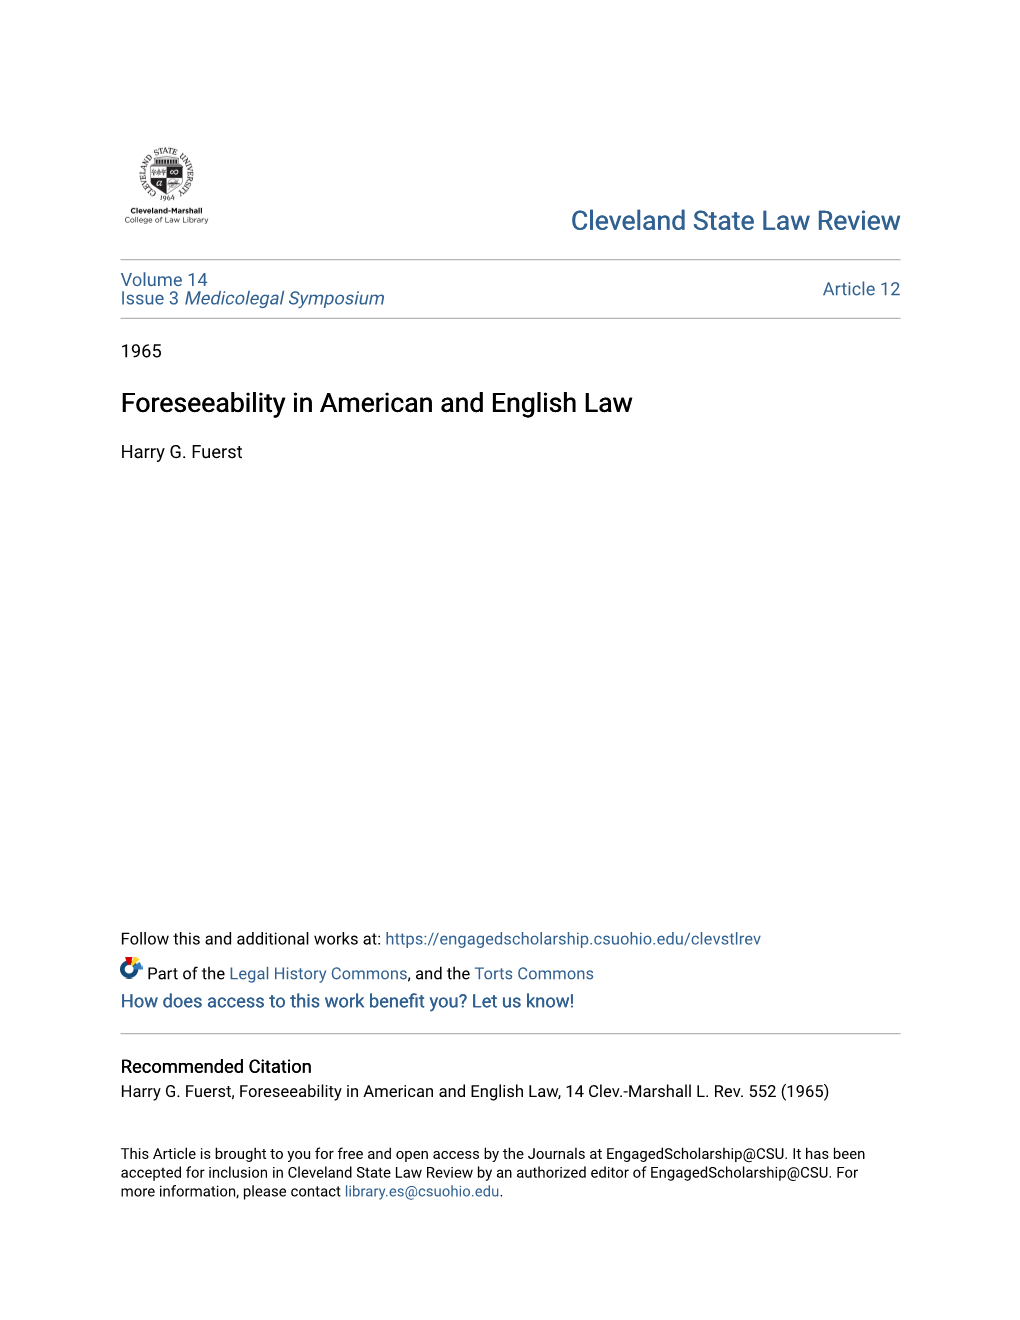 Foreseeability in American and English Law